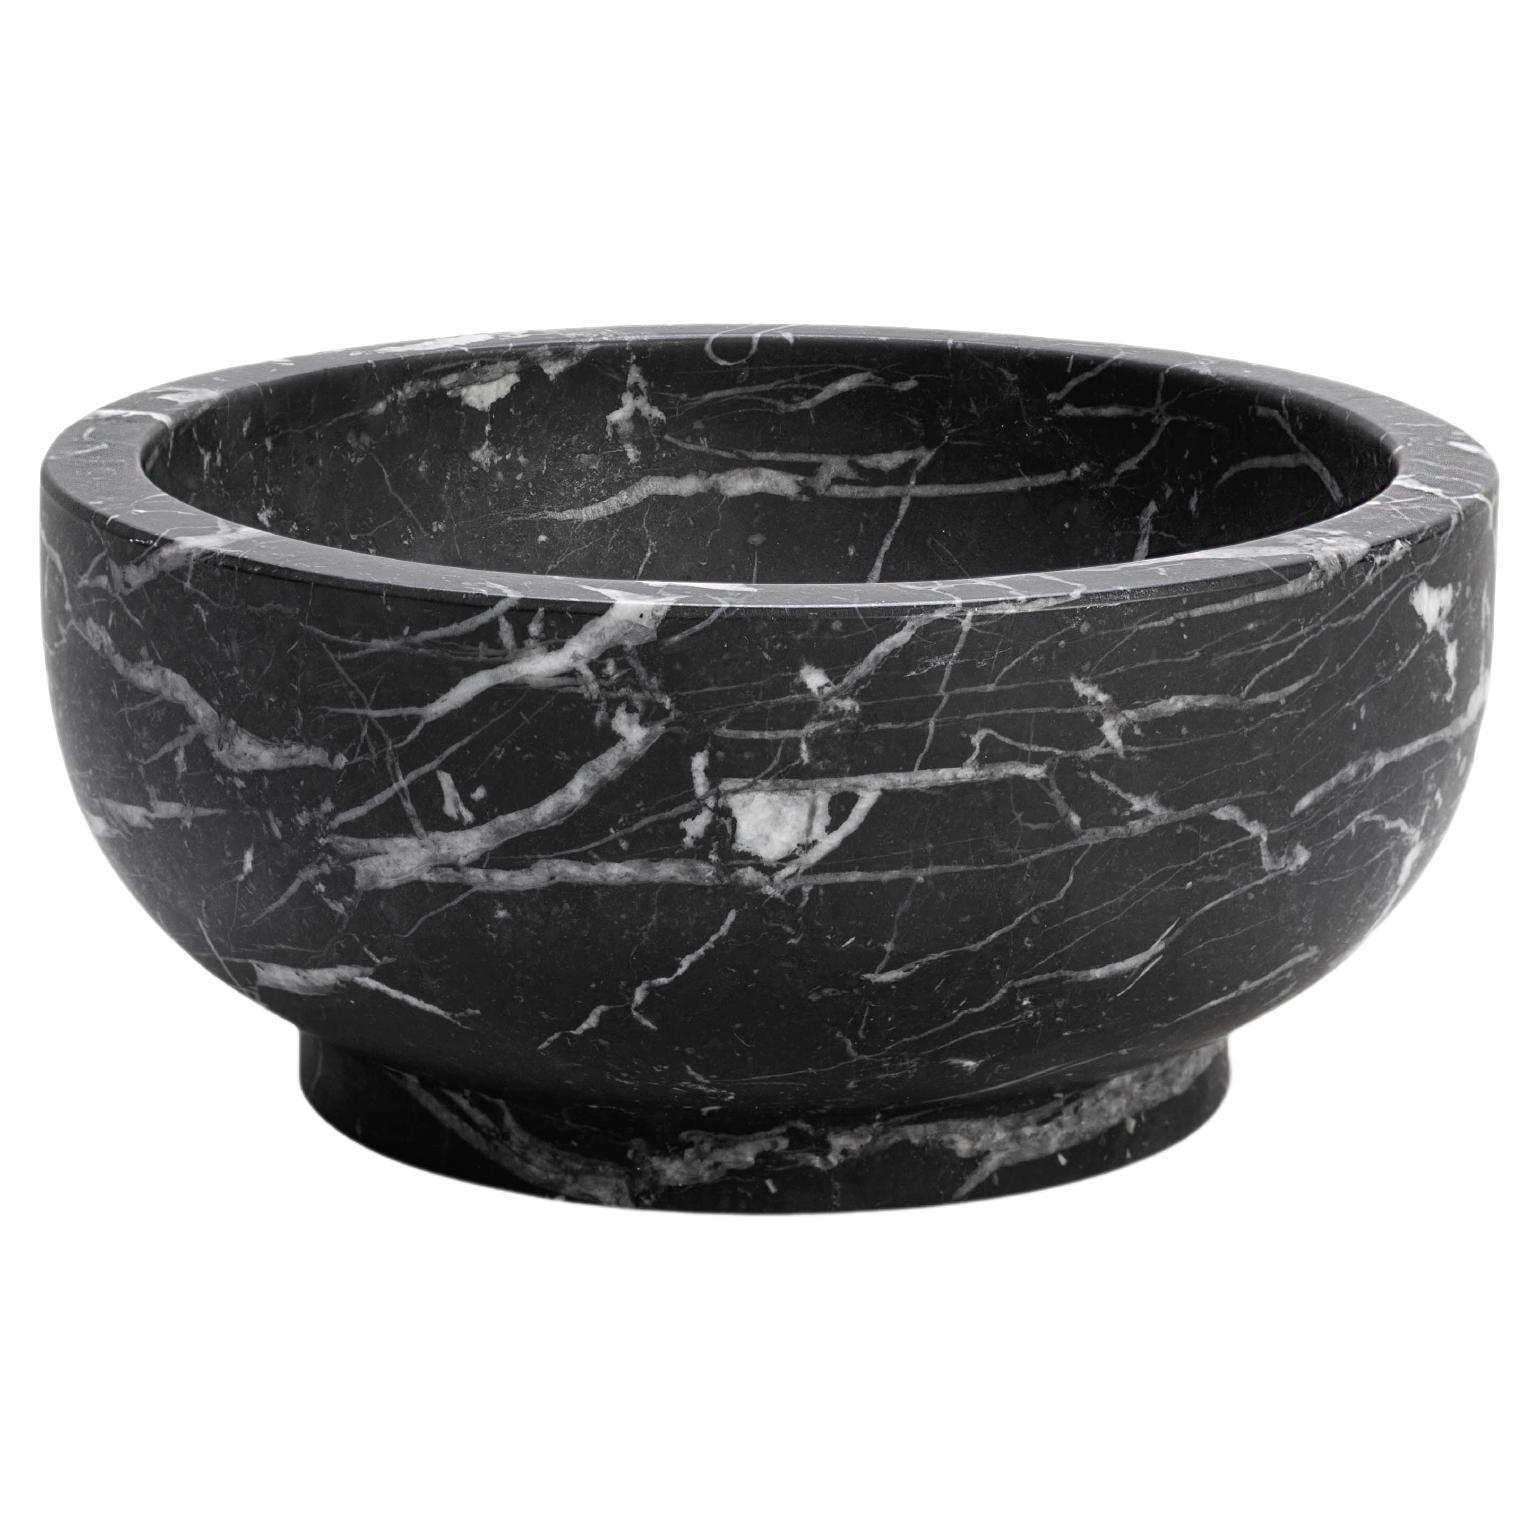 Bowl in Black Marquinia Marble by Christoforo Trapani, Italy 